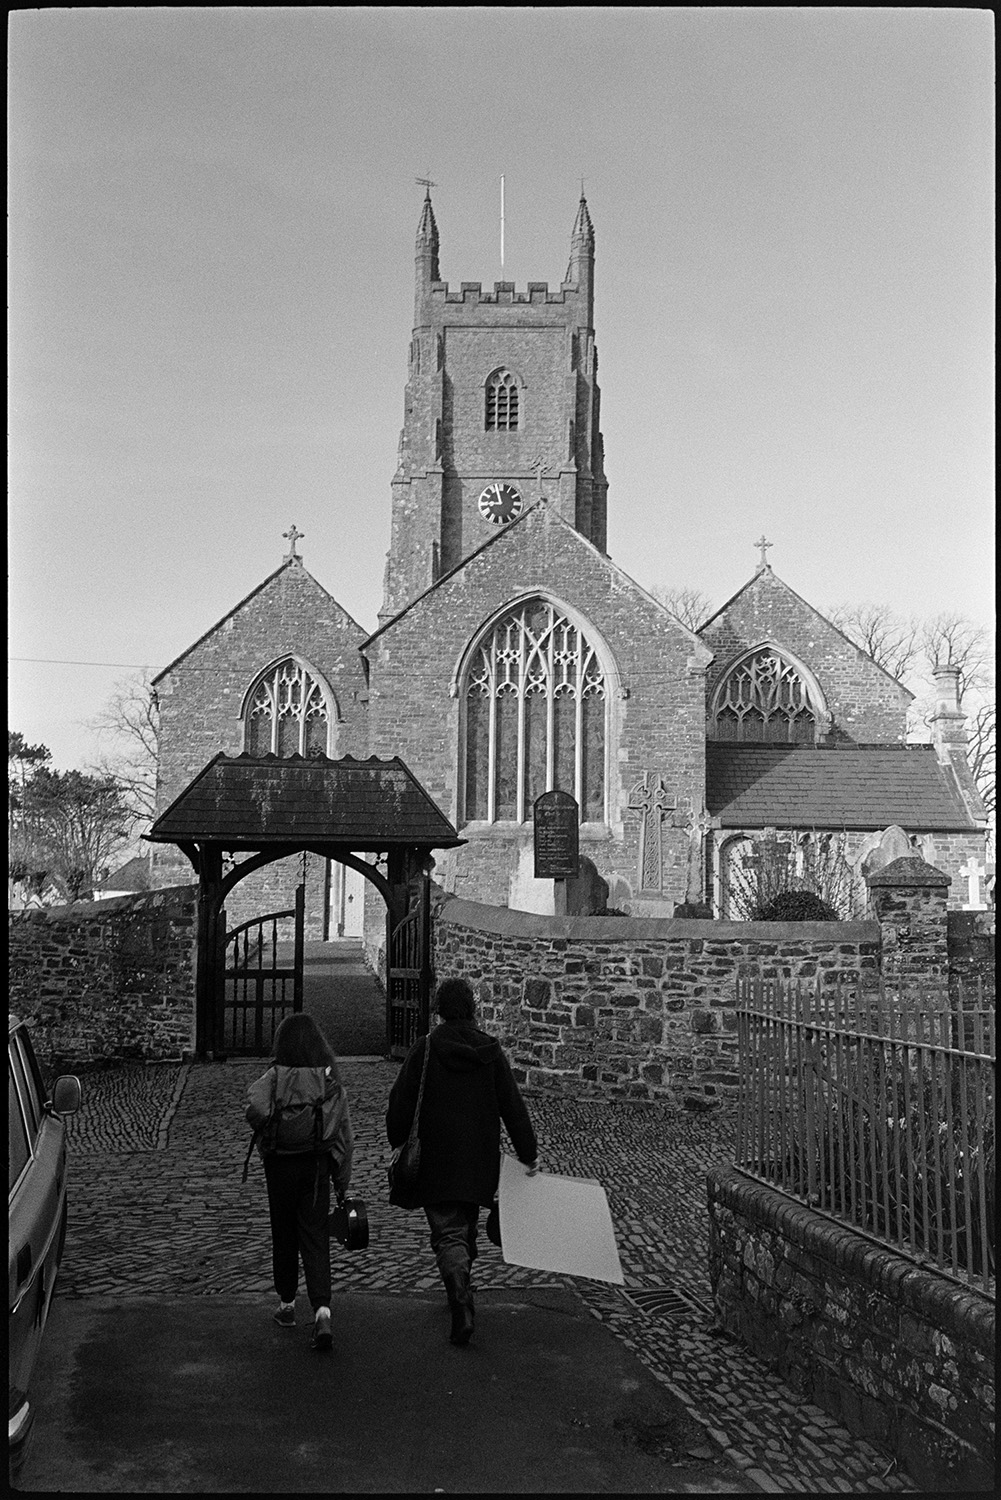 School children in playground playing in old school. 
[An adult and child walking along a cobbled path towards Chulmleigh Church, possibly after leaving Chulmleigh Primary School.]